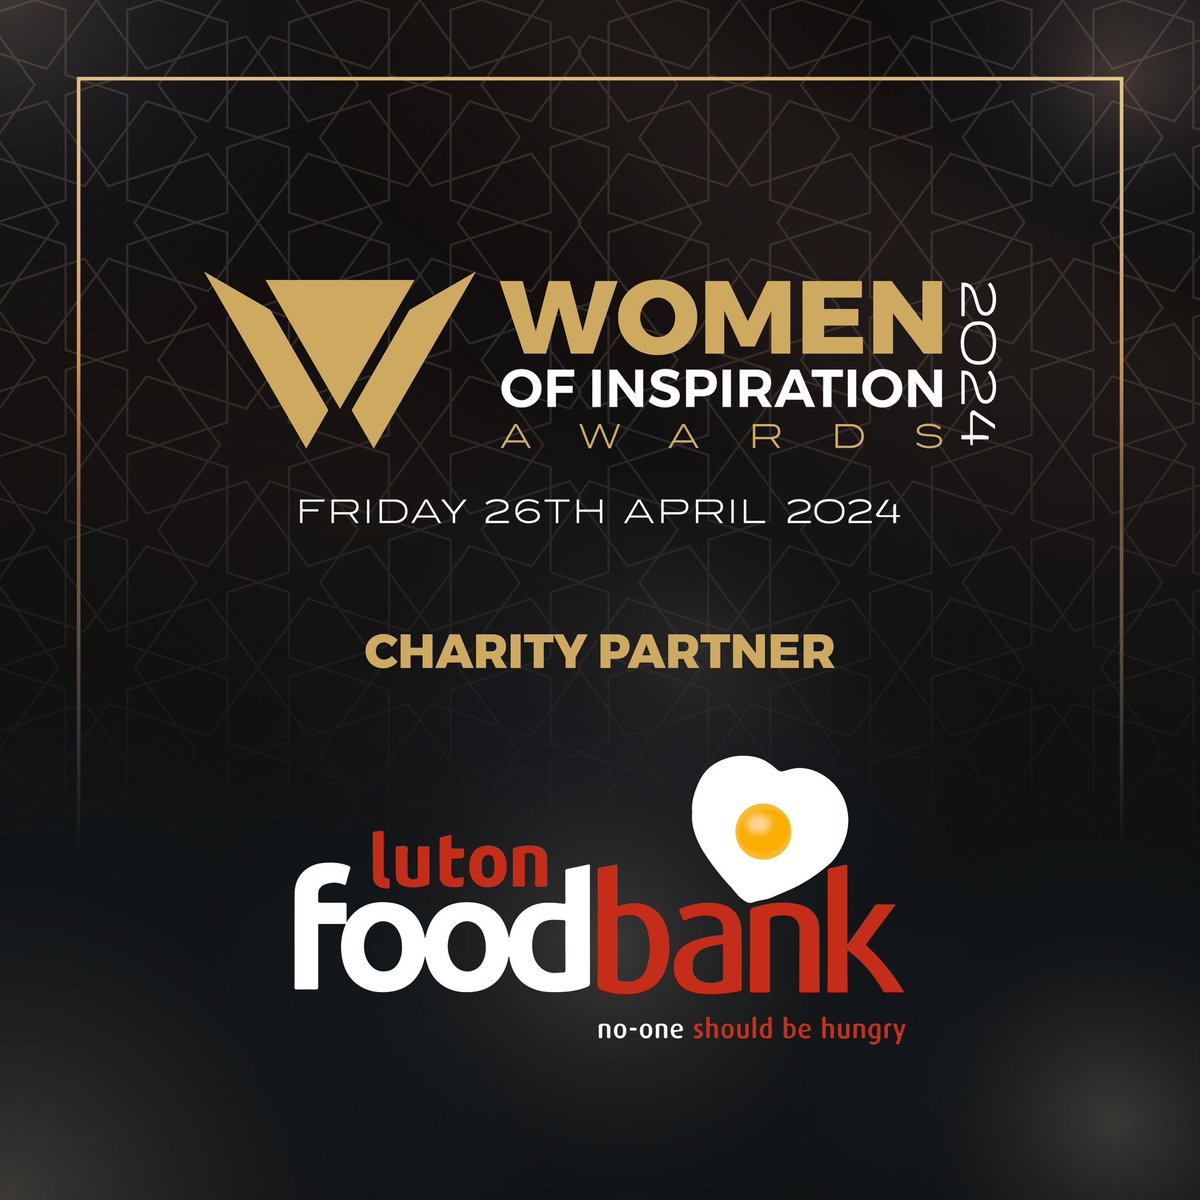 We are proud to announce that our charity partner for the Women of Inspiration Awards is Luton Foodbank. It's a wonderful opportunity to make a positive impact in our community and a difference in the lives of those in need. #awards #womenofinspirationawards #community